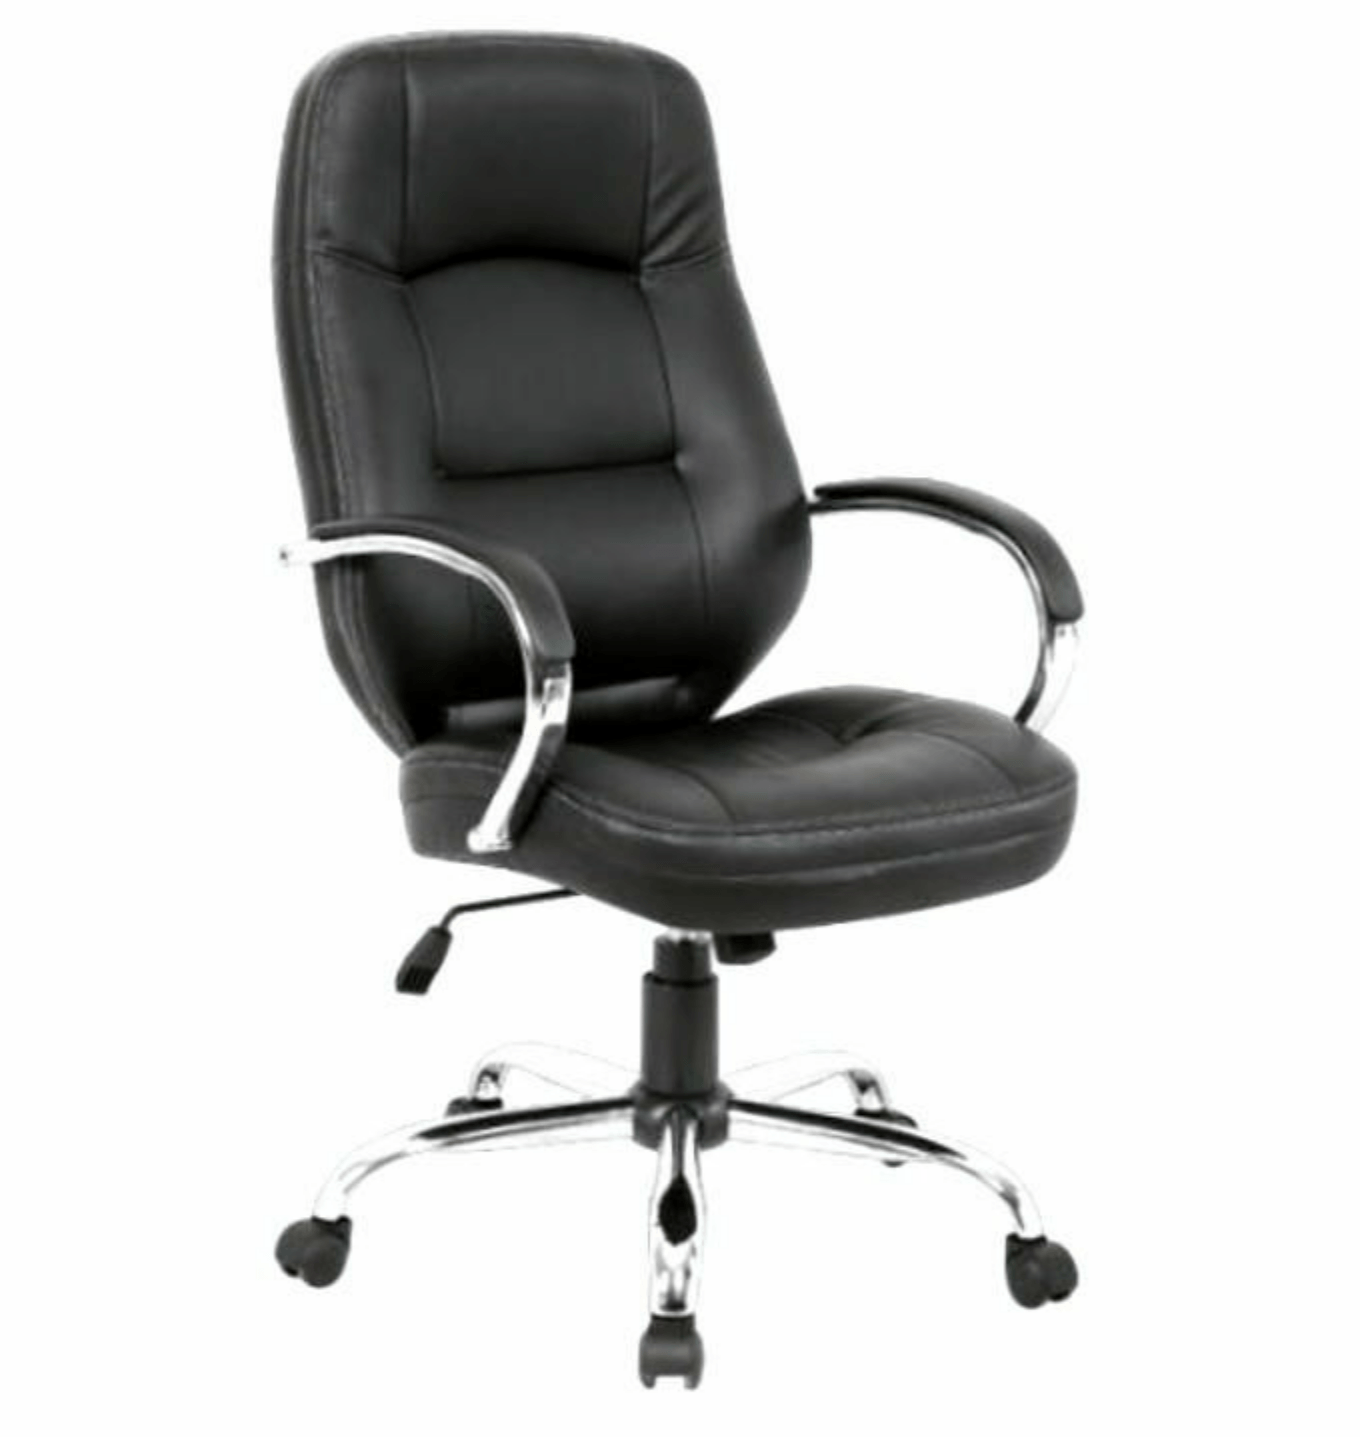 Executive Swivel Office Chair - High Back Lumber Support | Quality